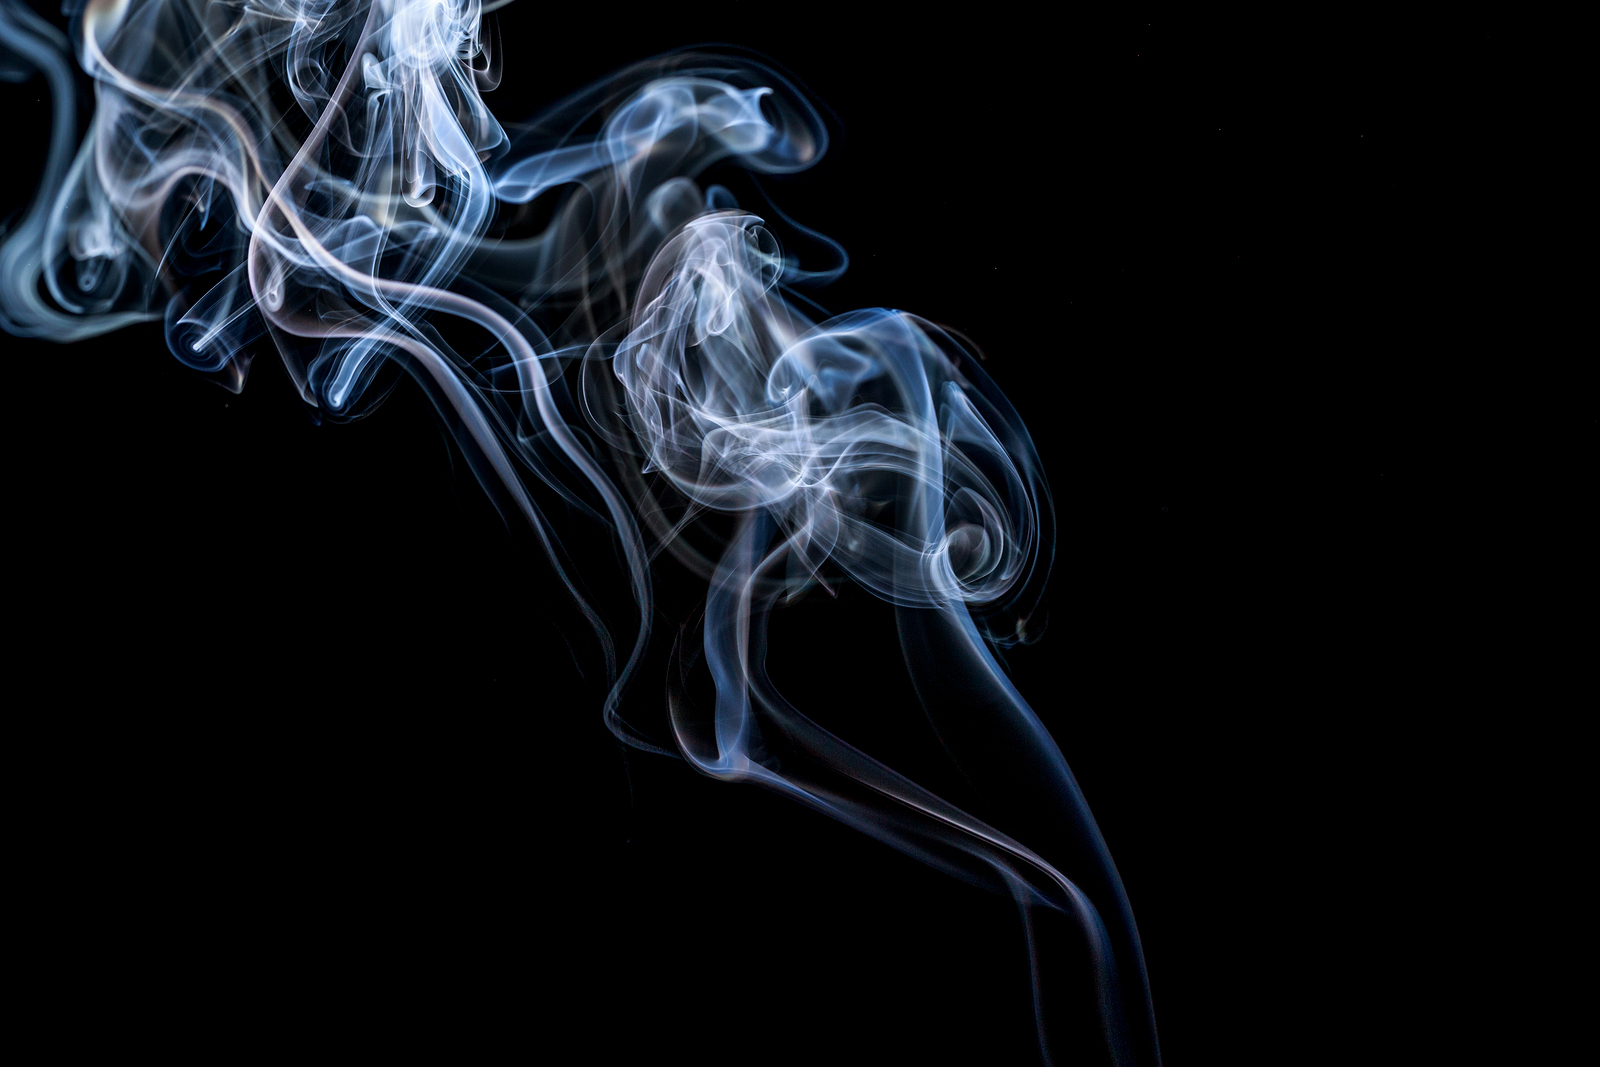 Abstract Smoke On A Black Background.